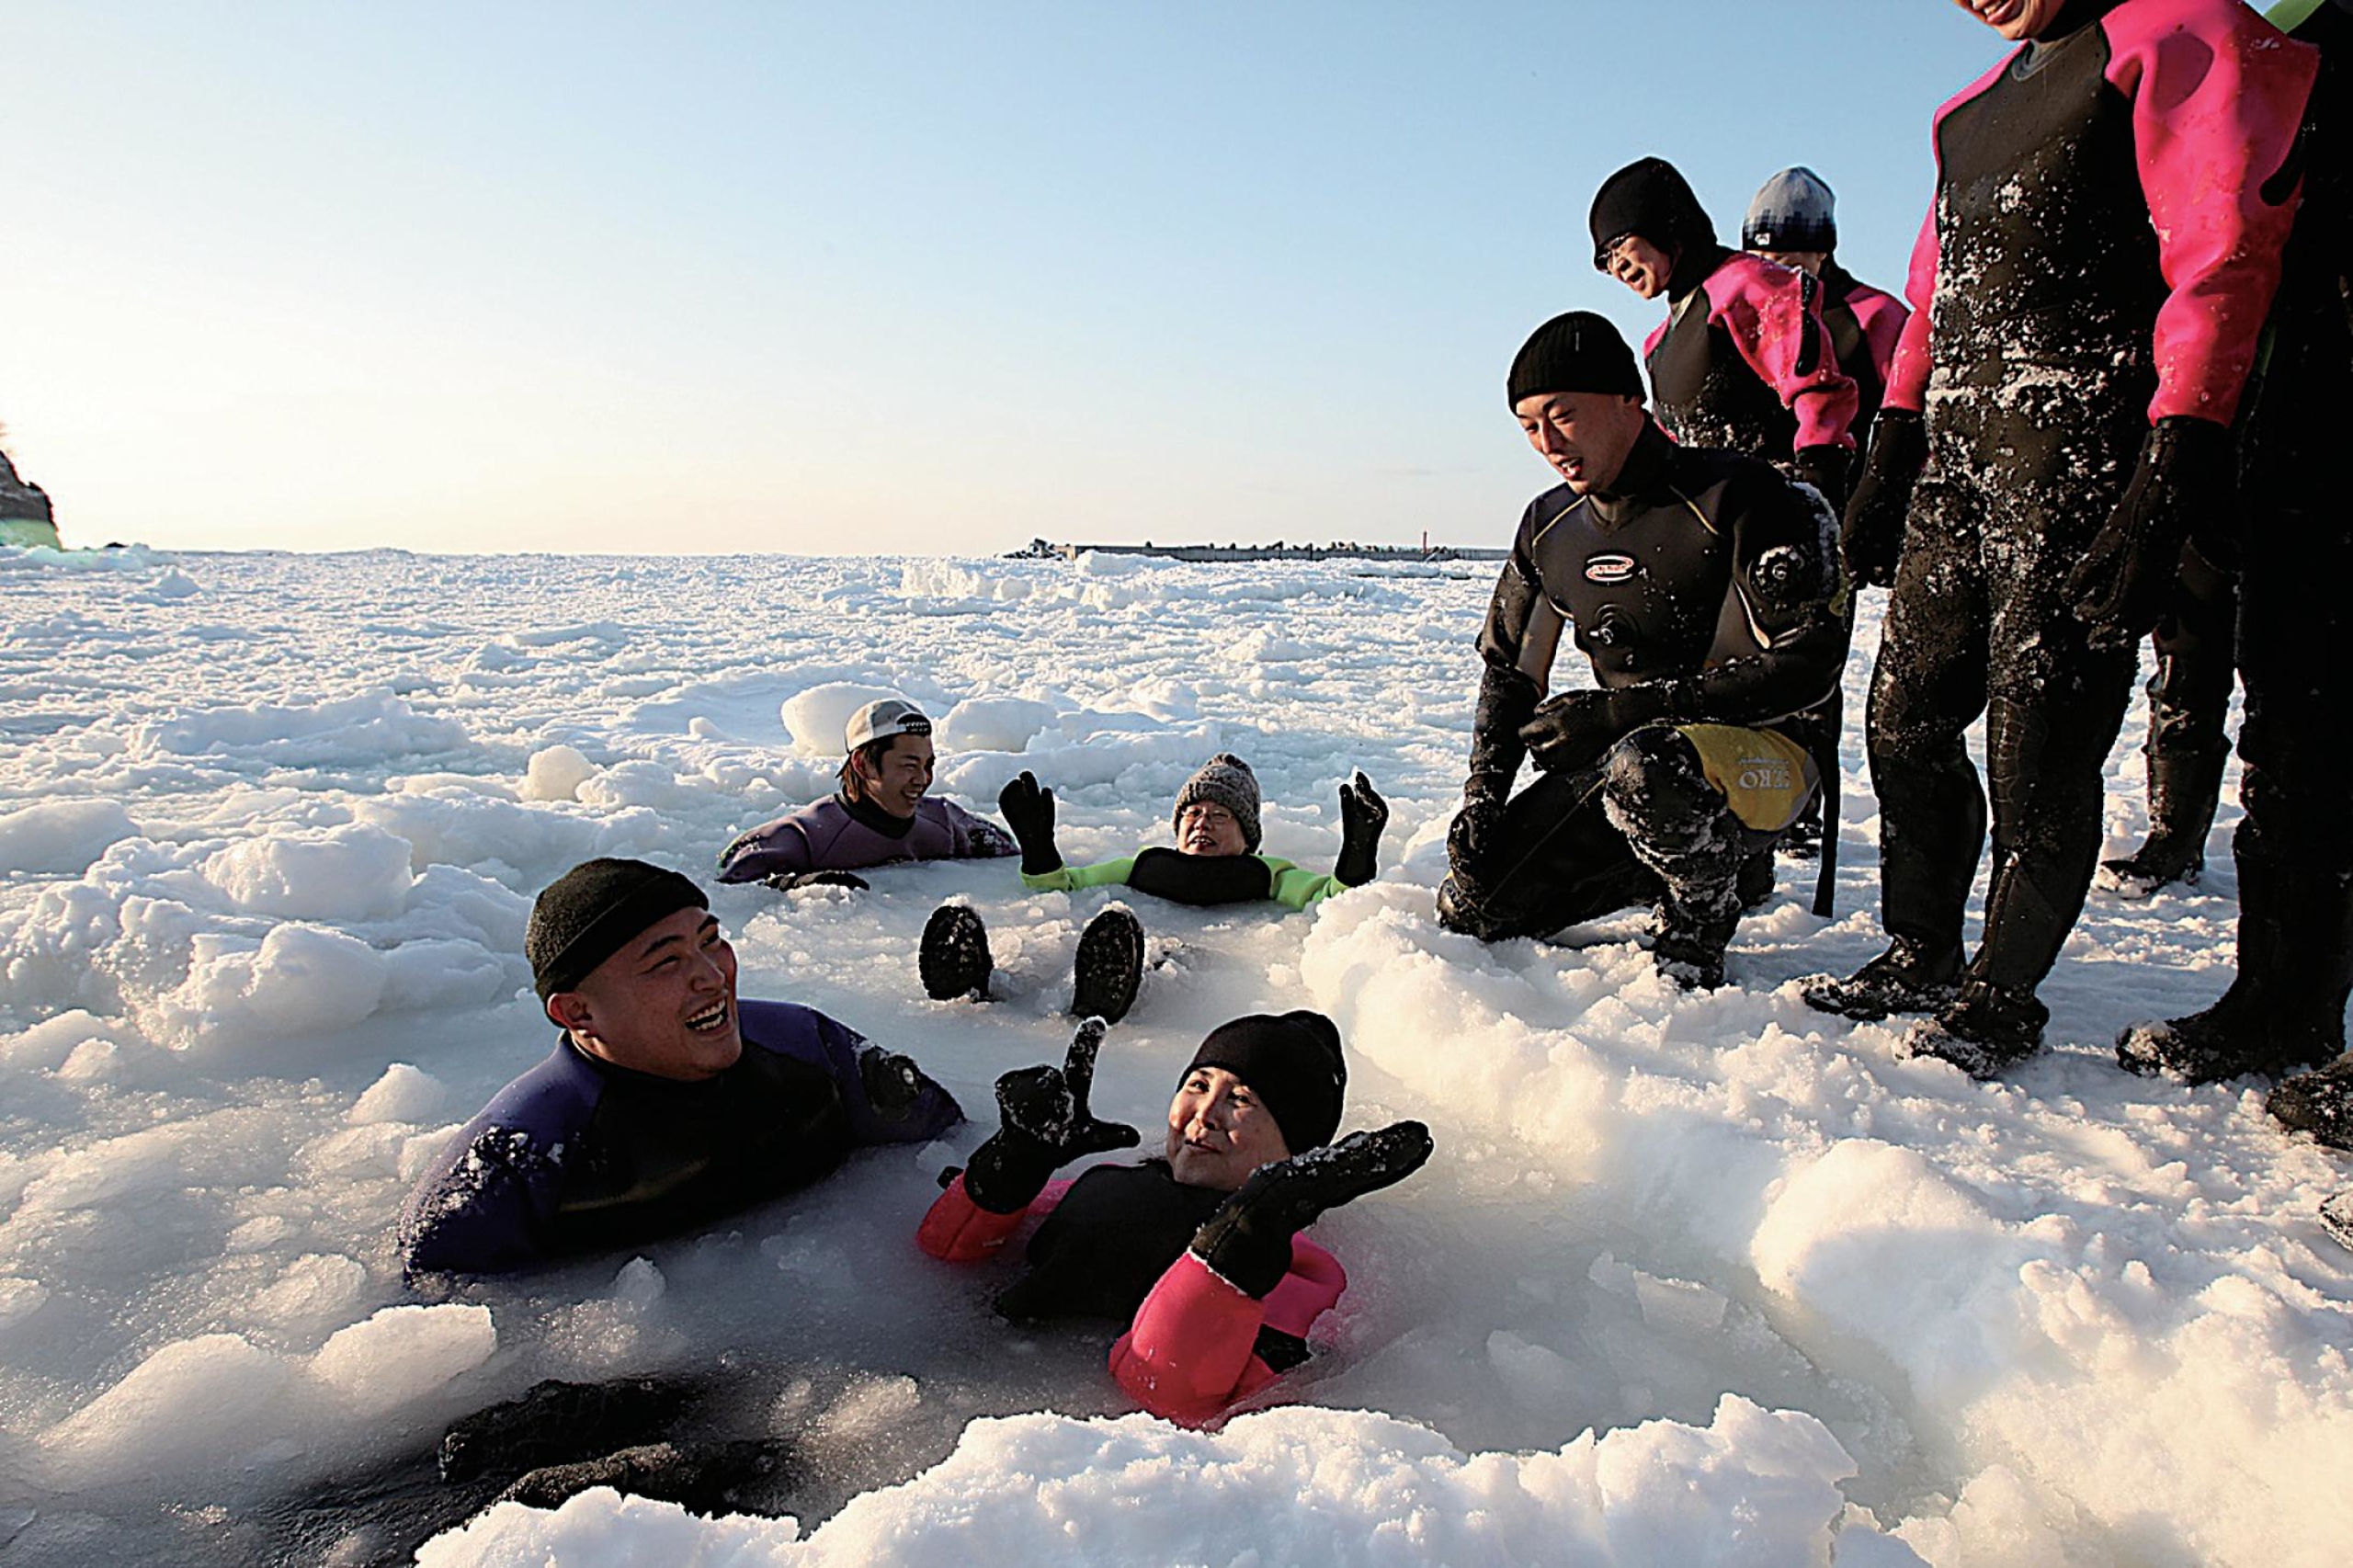 SHINRA Activity - Experience Drift Ice From the Perspective of an Animal